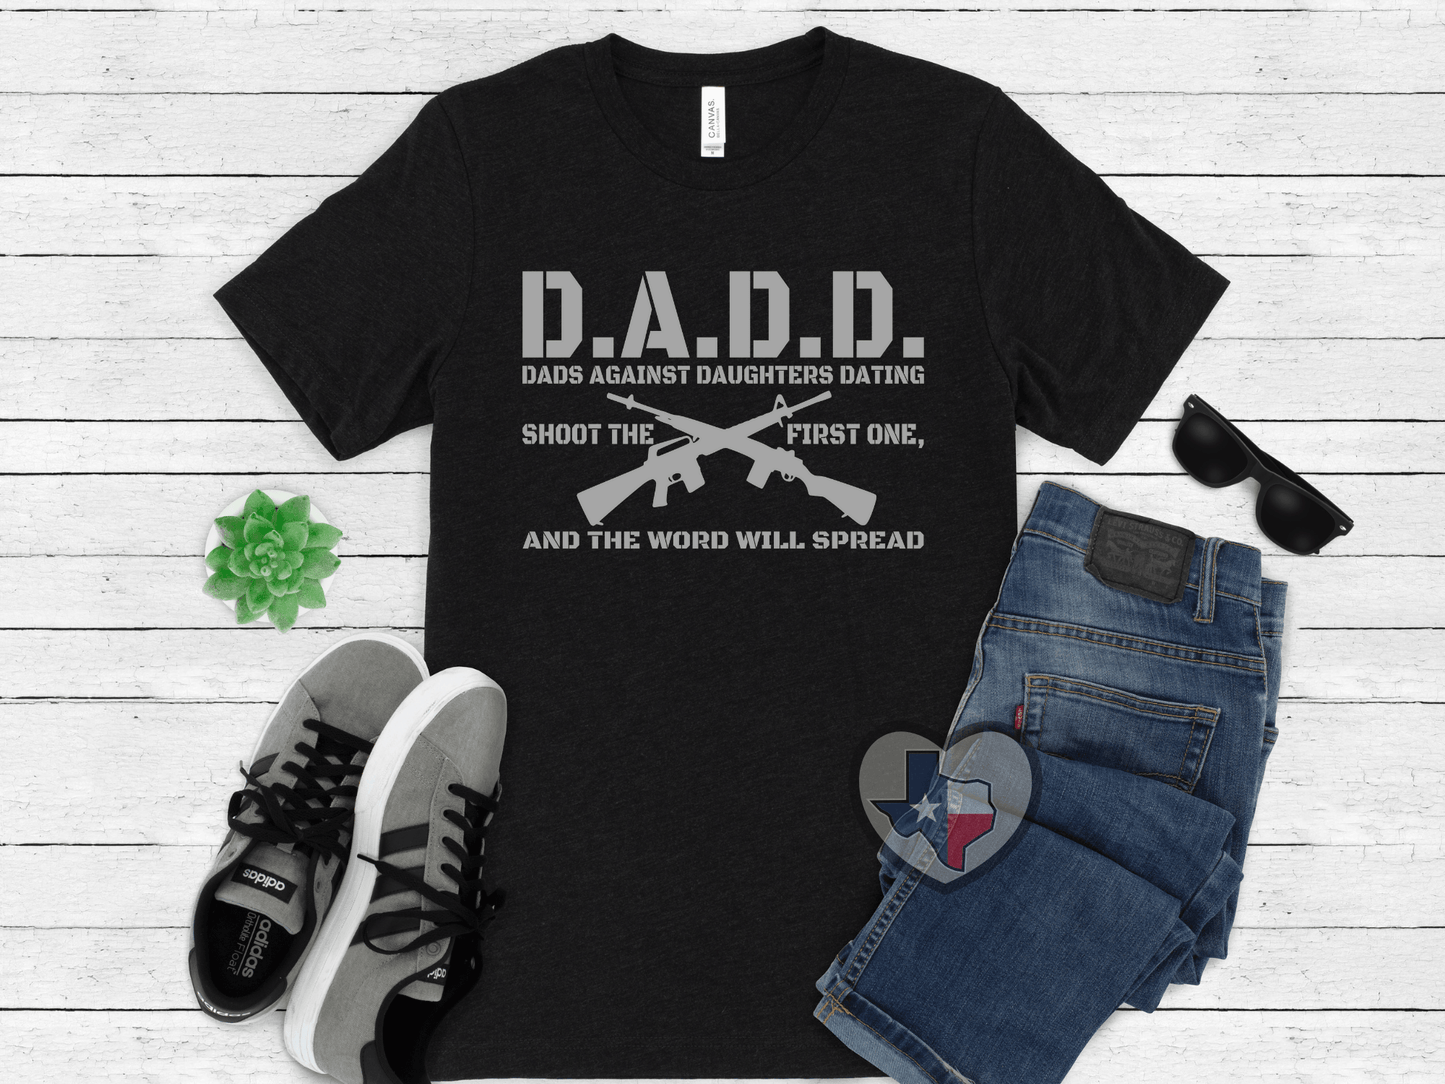 Dads Against Daughters Dating - Texas Transfers and Designs